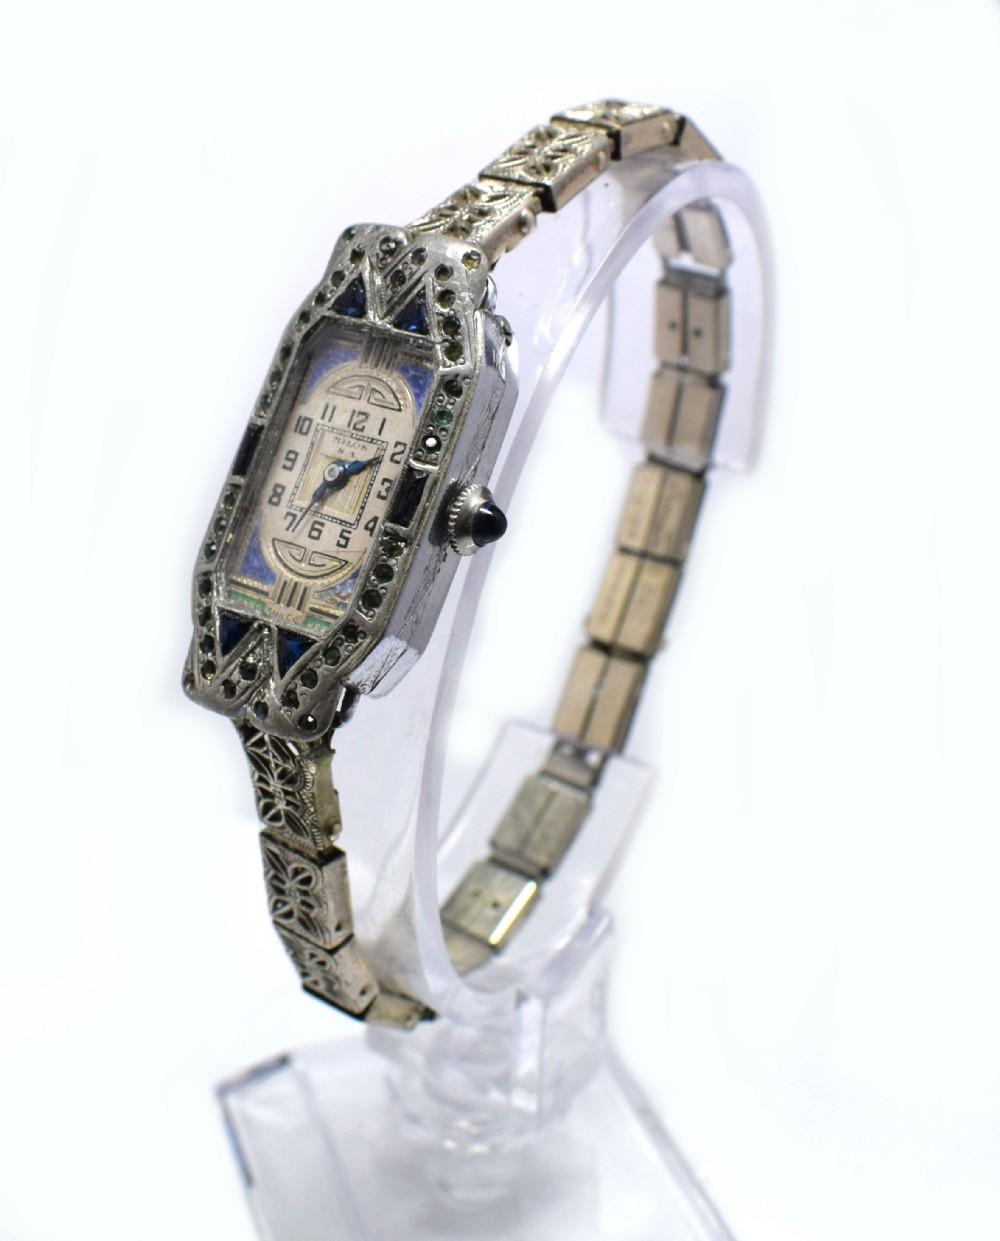 Women's 1930s Art Deco Ladies Sapphire Marcasite Enamel Watch with a Filigree Band